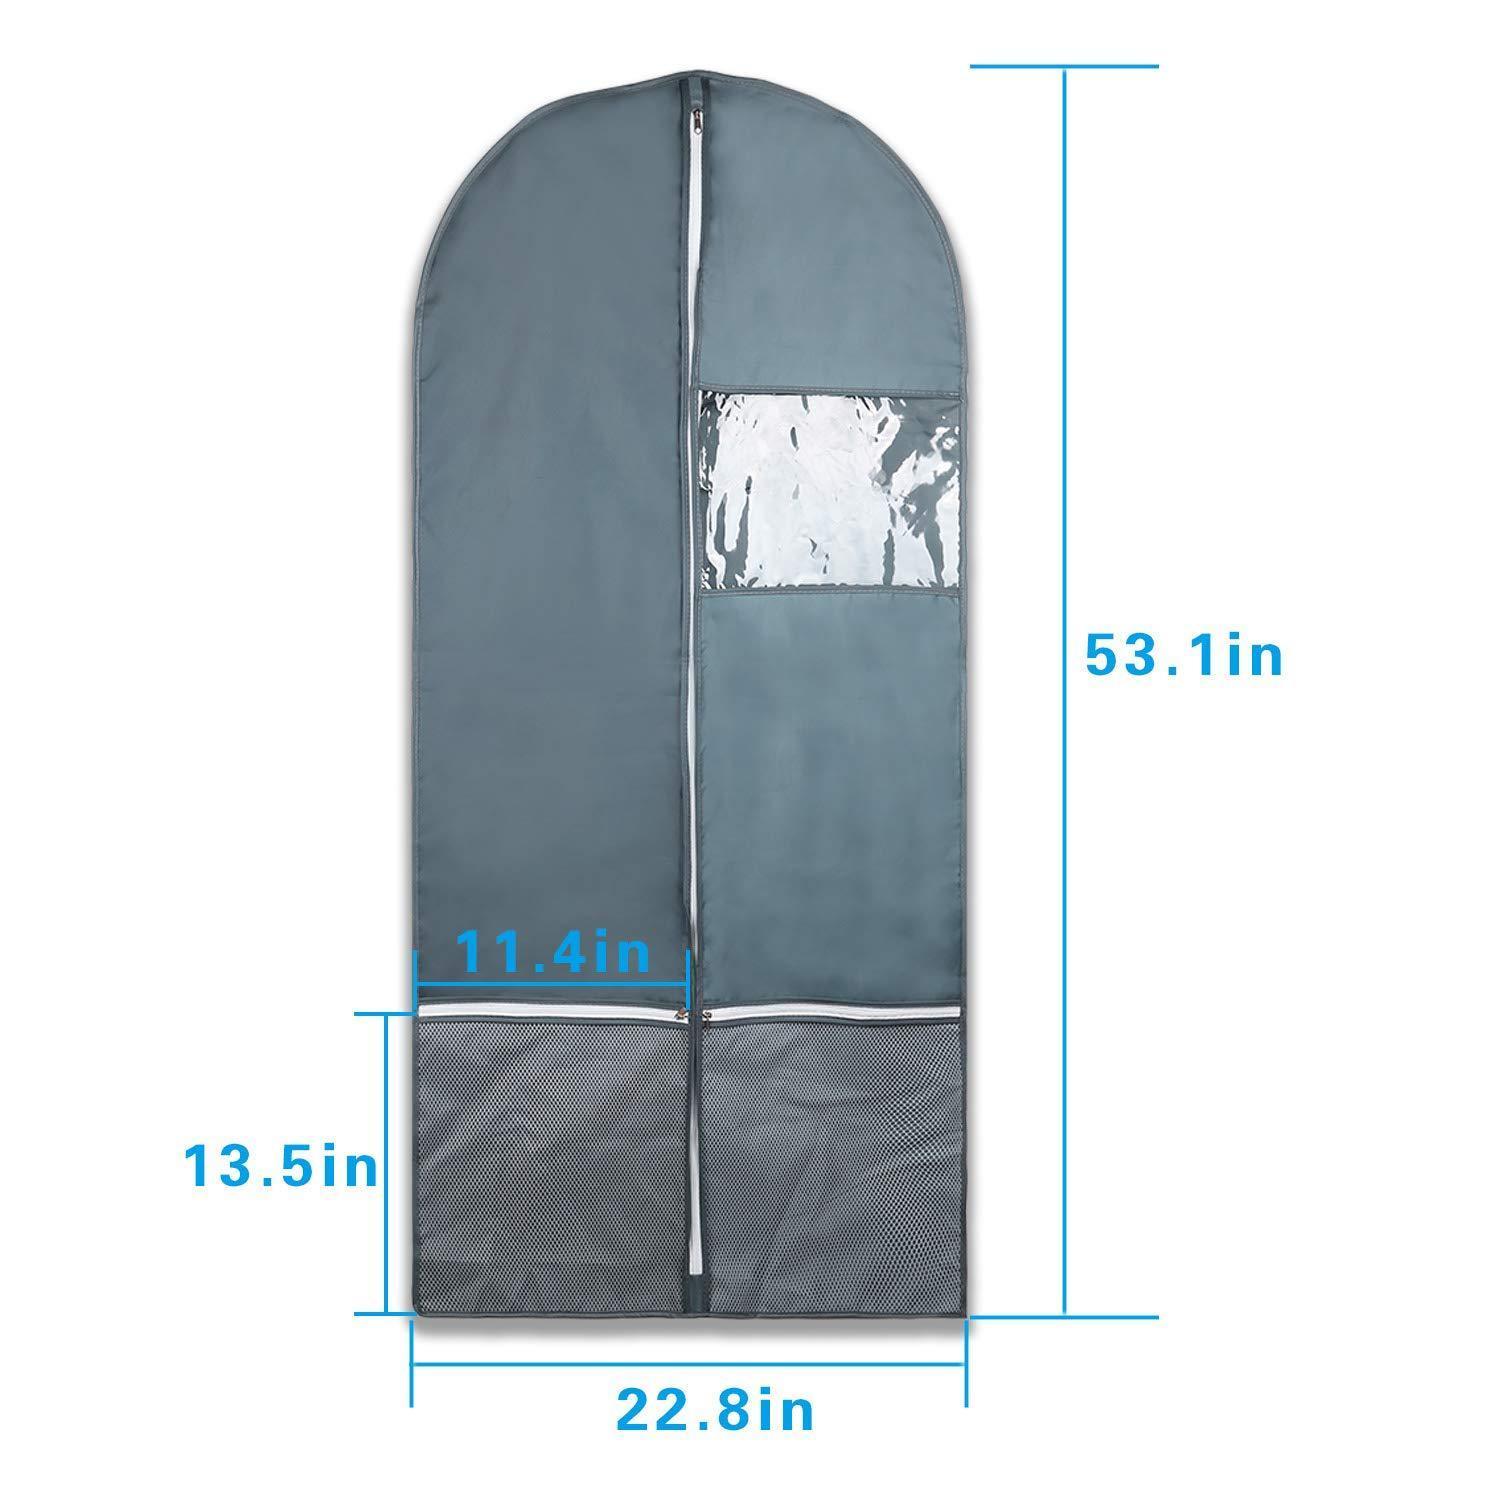 Save garment bag with pockets set dance costume bags 53 x 23 for dance competitions travel storage closet suits dress coat with 2 medium zipper pockets and 1 clear visible window pack of 3